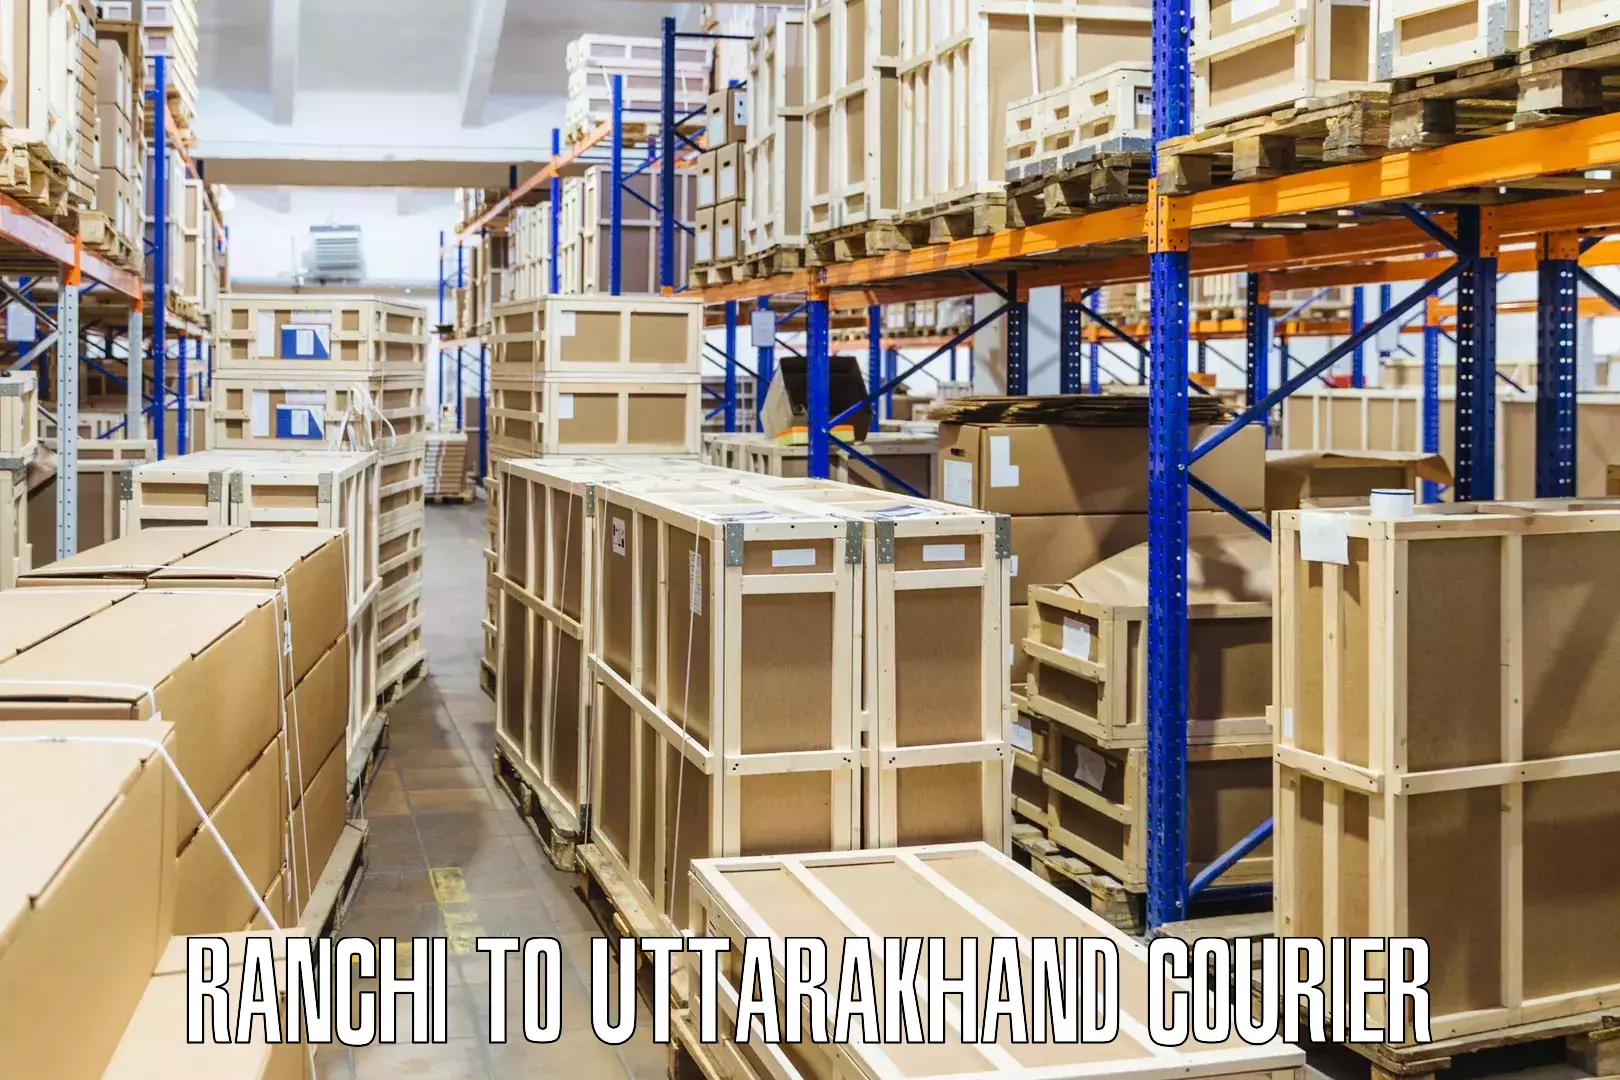 Round-the-clock parcel delivery Ranchi to Uttarakhand